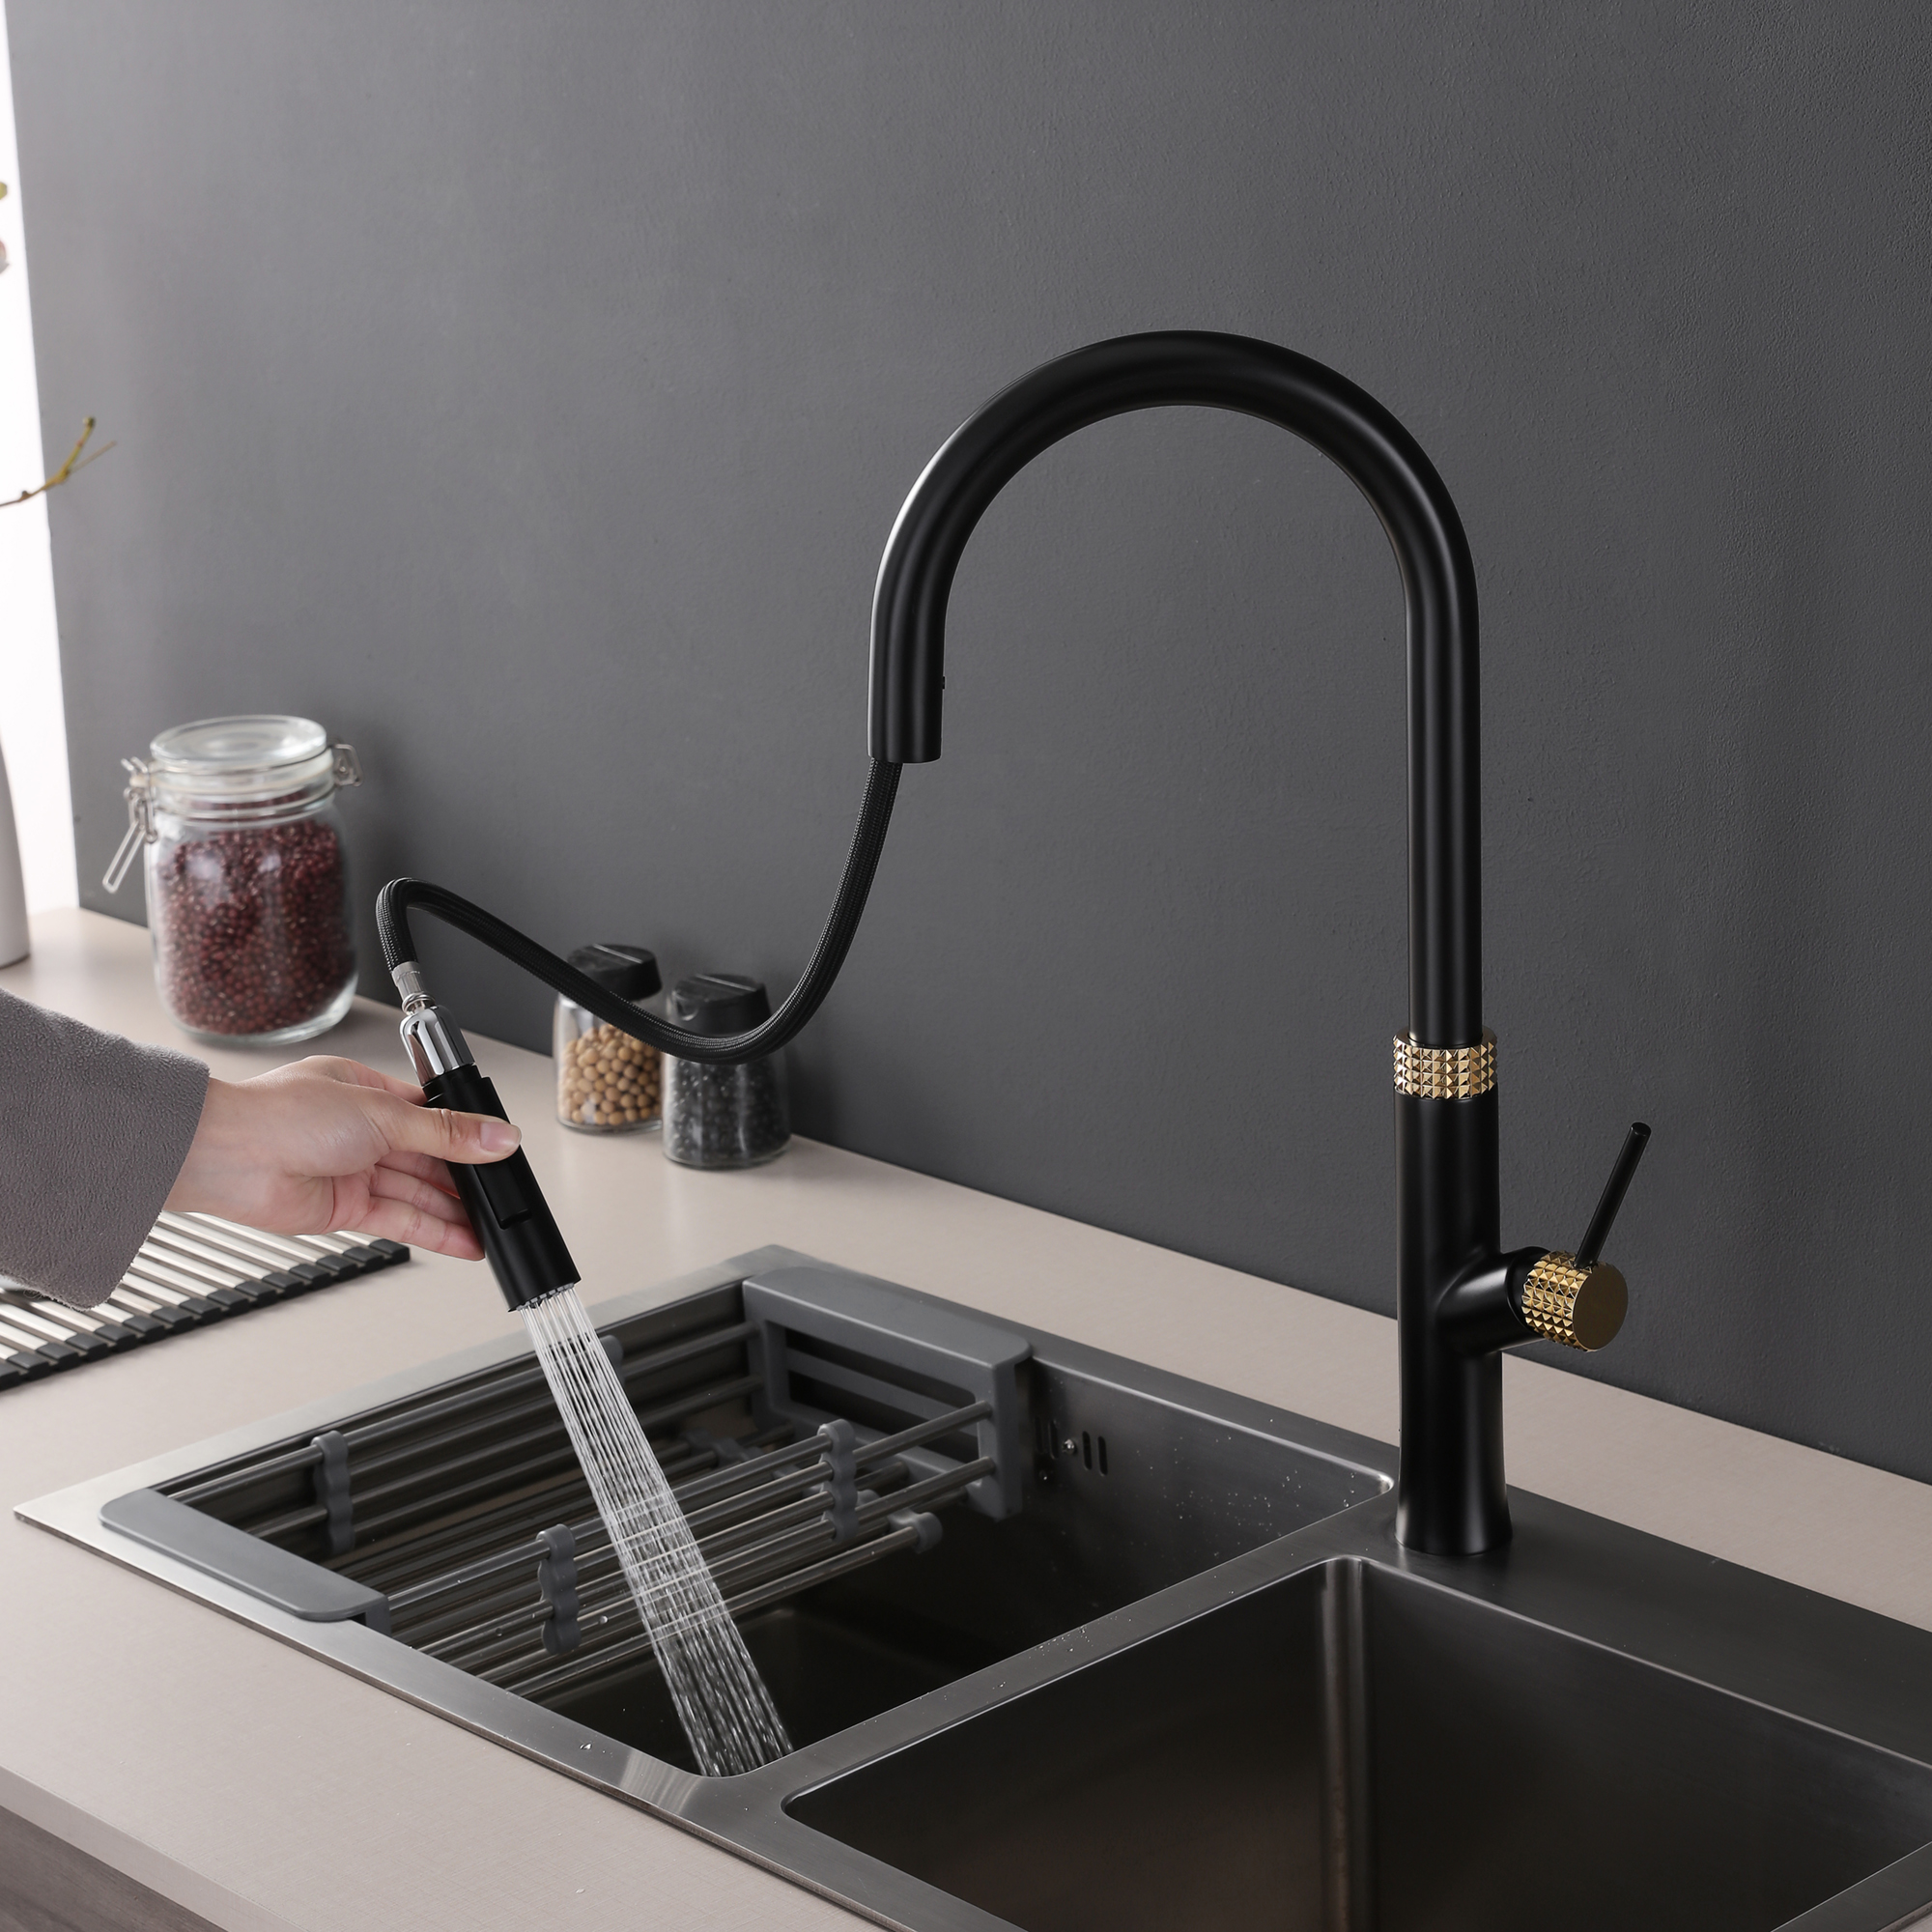 Hot Selling Black Color Faucet Faucets Mixers & Taps Matt White Kitchen Tap With Ce Certificate